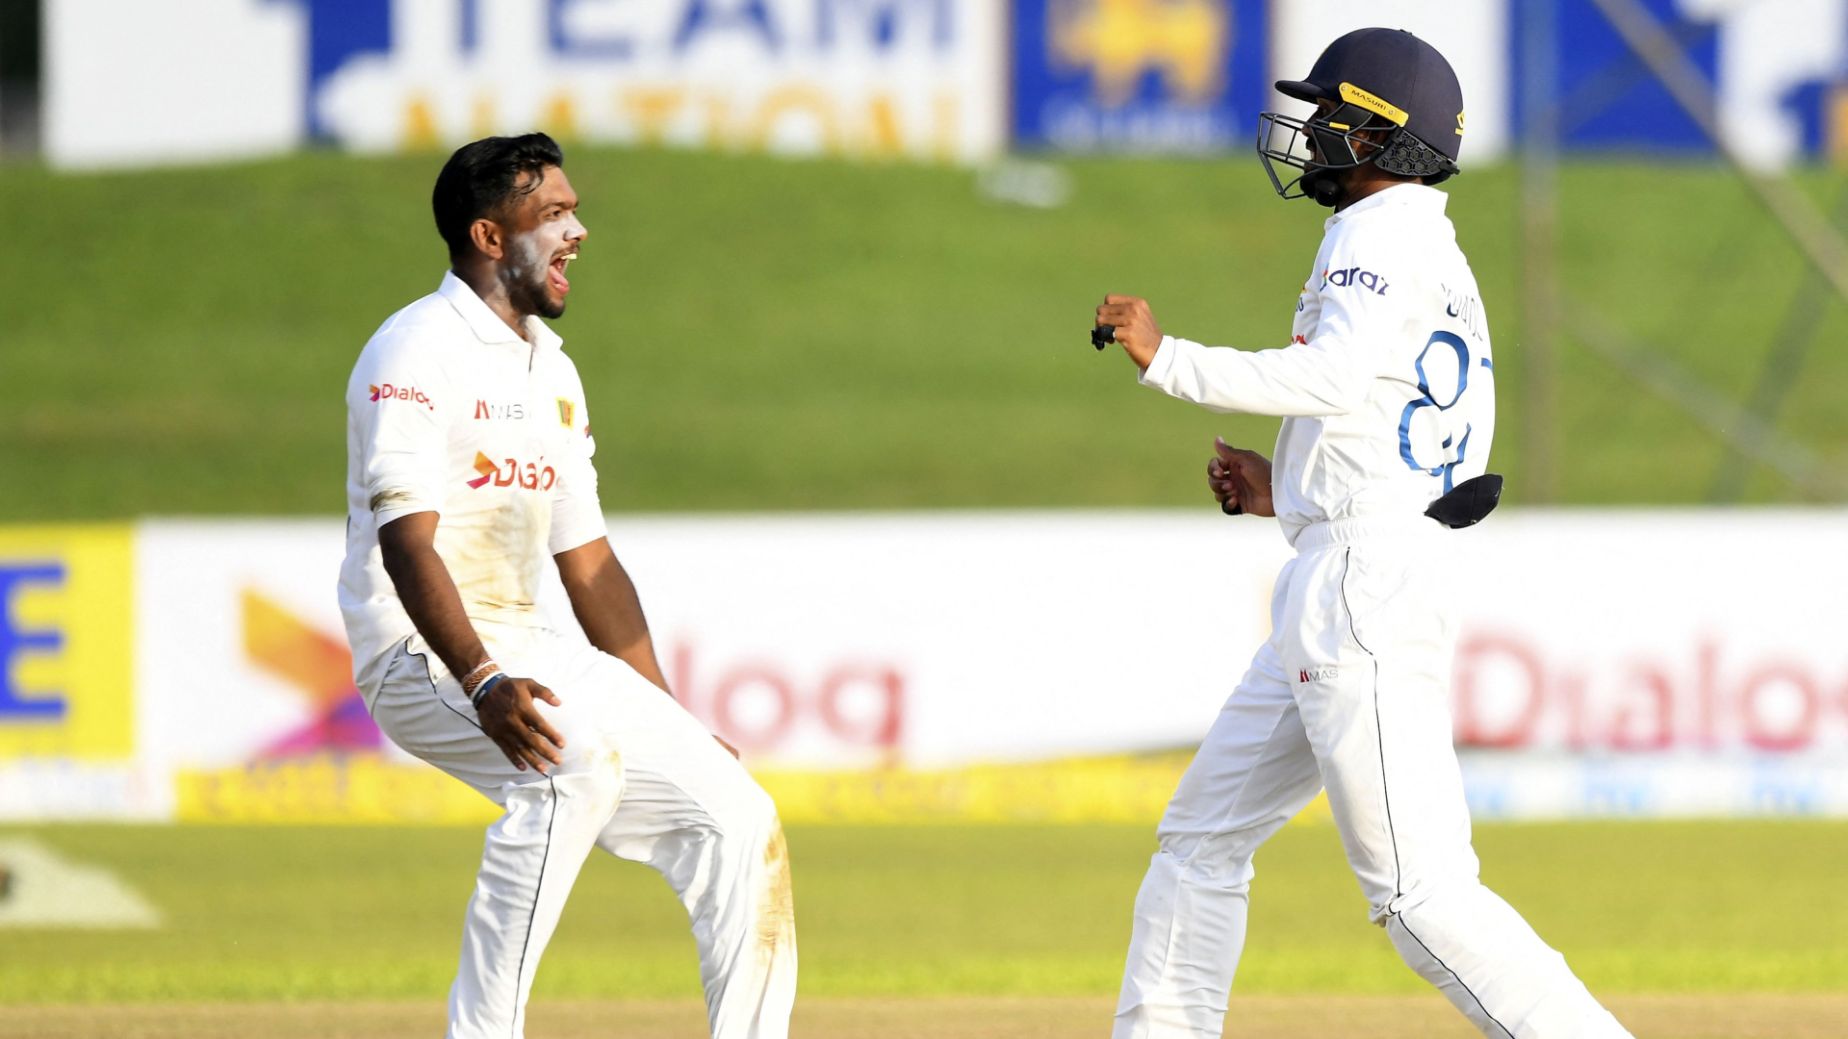 SL vs WI | 1st Test | Day- 4: Ramesh Mendis spins a web around Windies batters, gets Lanka on brink of victory